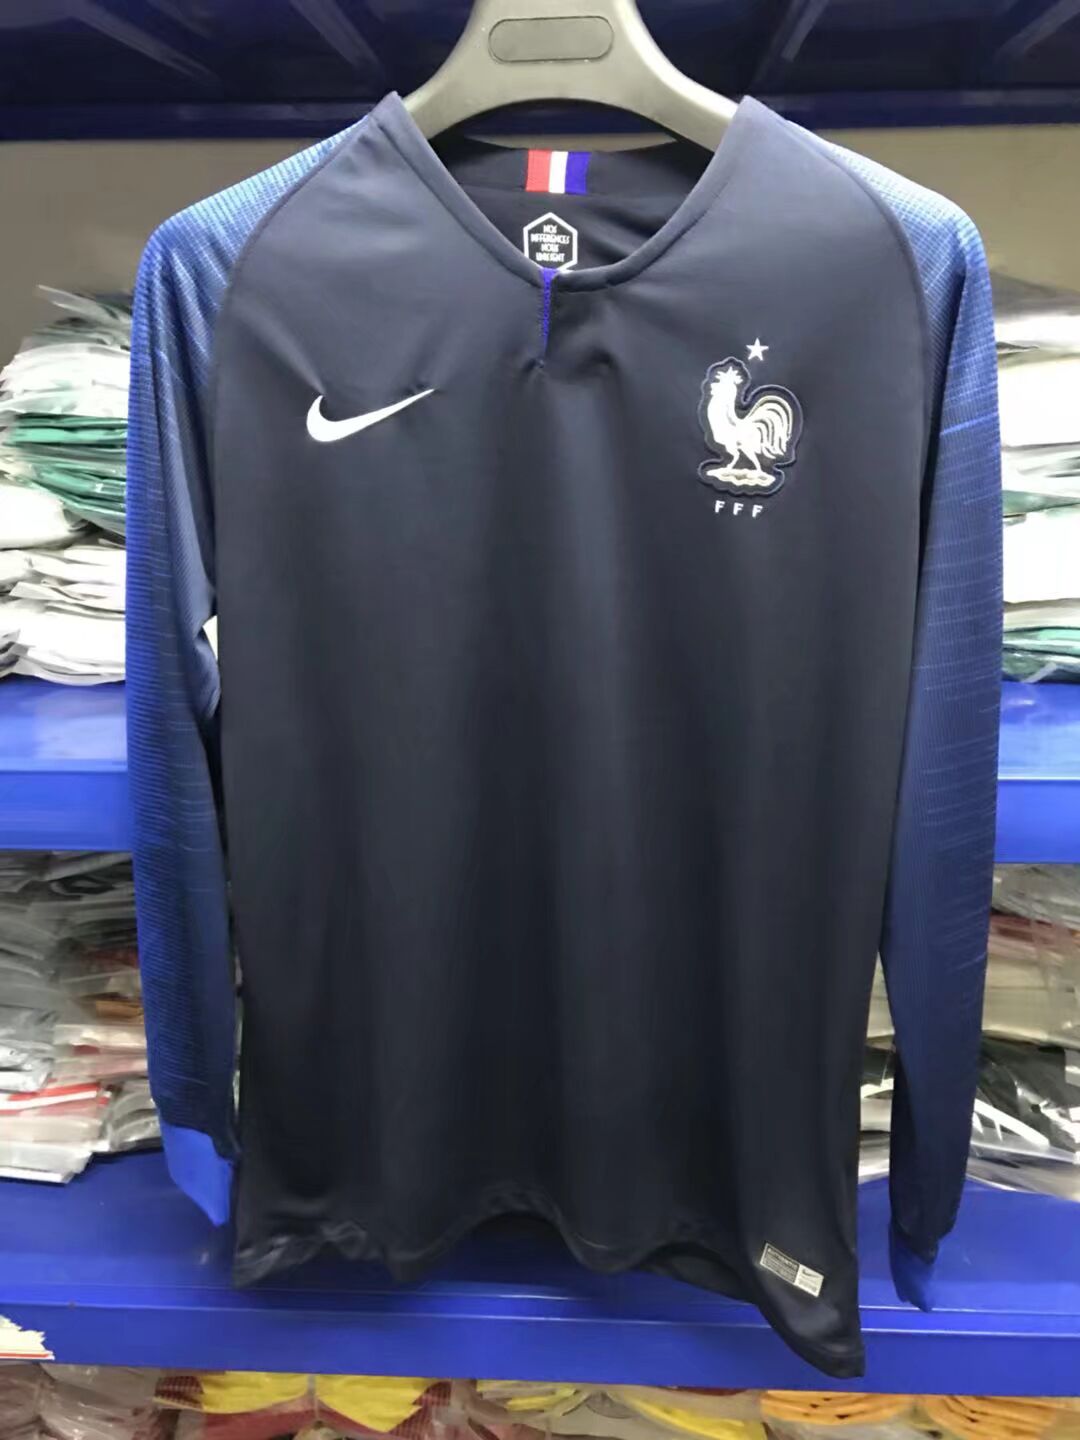 France 2018 World Cup LS Home Soccer Jersey